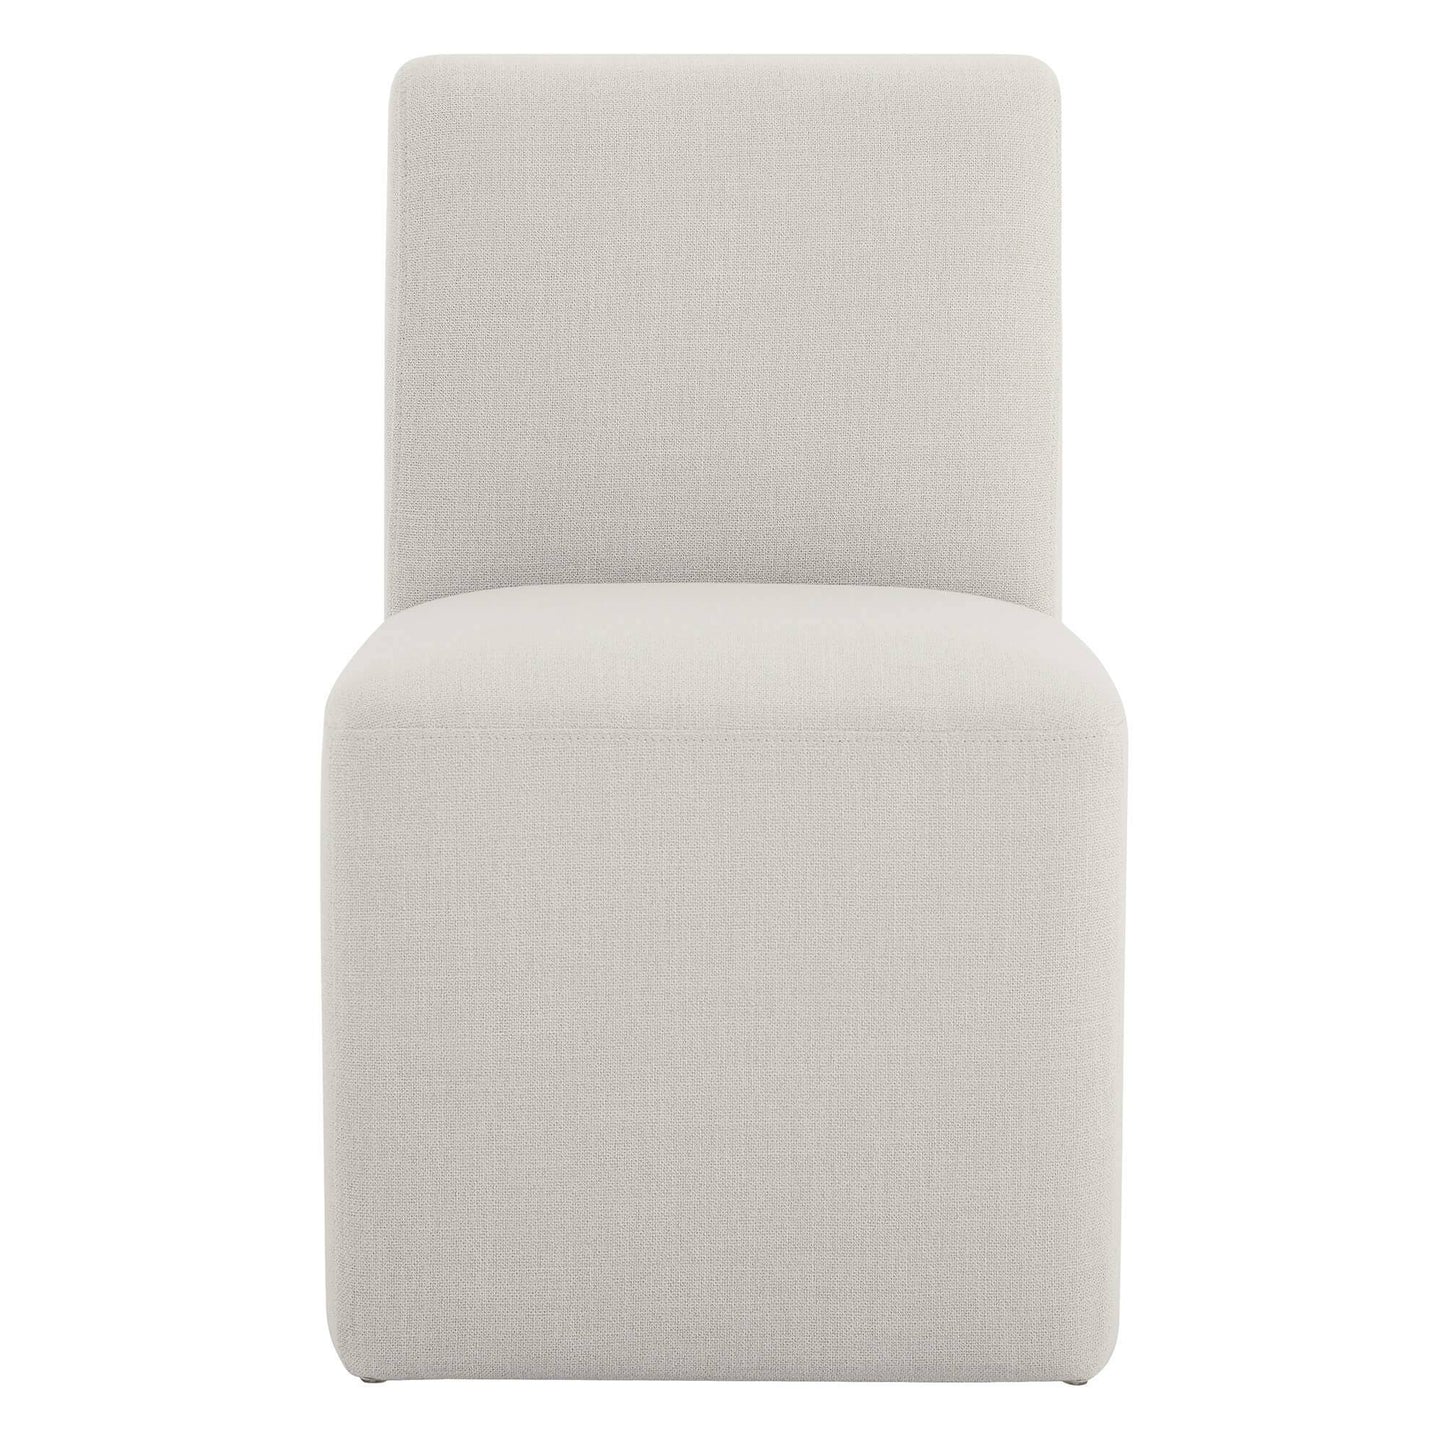 ️ Aida Performance Fabric Dining Chair With Casters Base (Set Of 2) - Chitaliving.Com, Performance Fabric / Linen